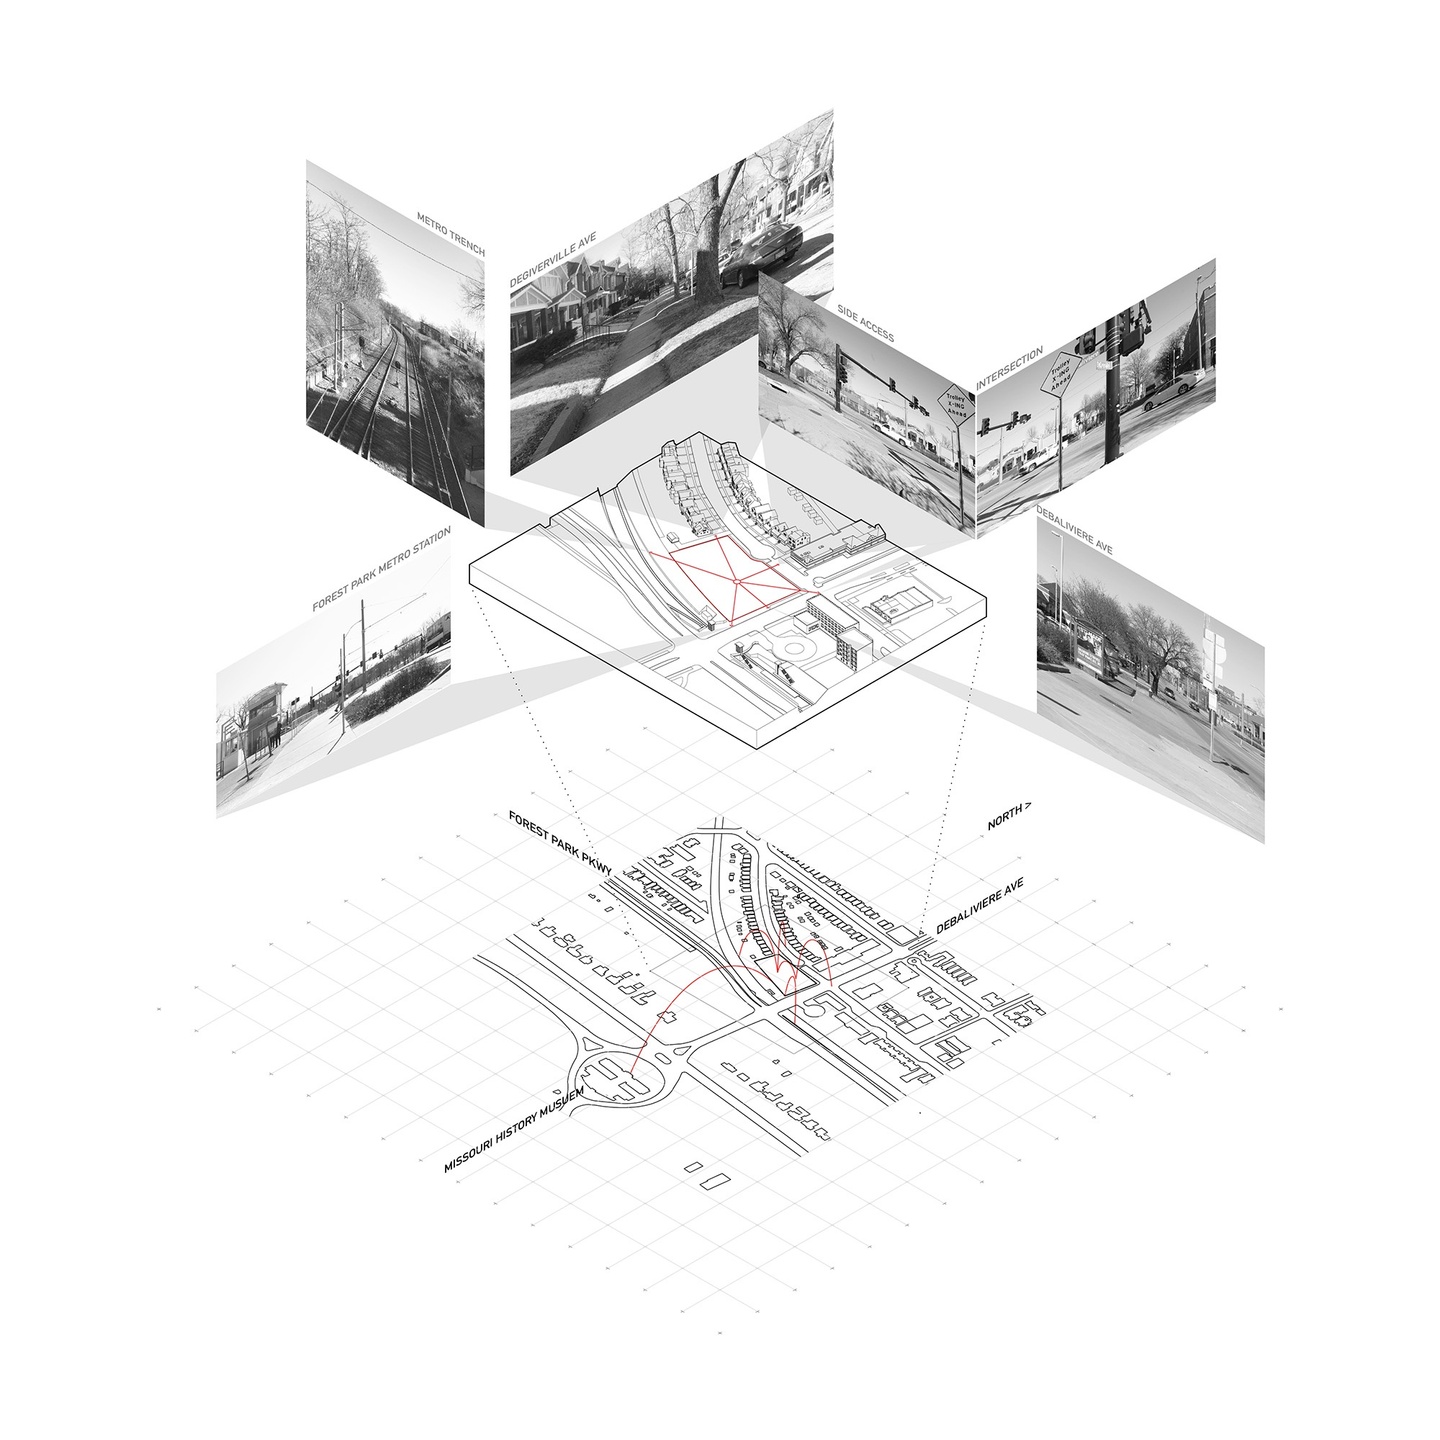 Axonometric diagram of a line drawn and axonometric site map at Forest Park Parkway and Debalivere Avenue including the Metro and the Missouri History Museum in black and white with red details depicting photos of site views and relationships to the location.